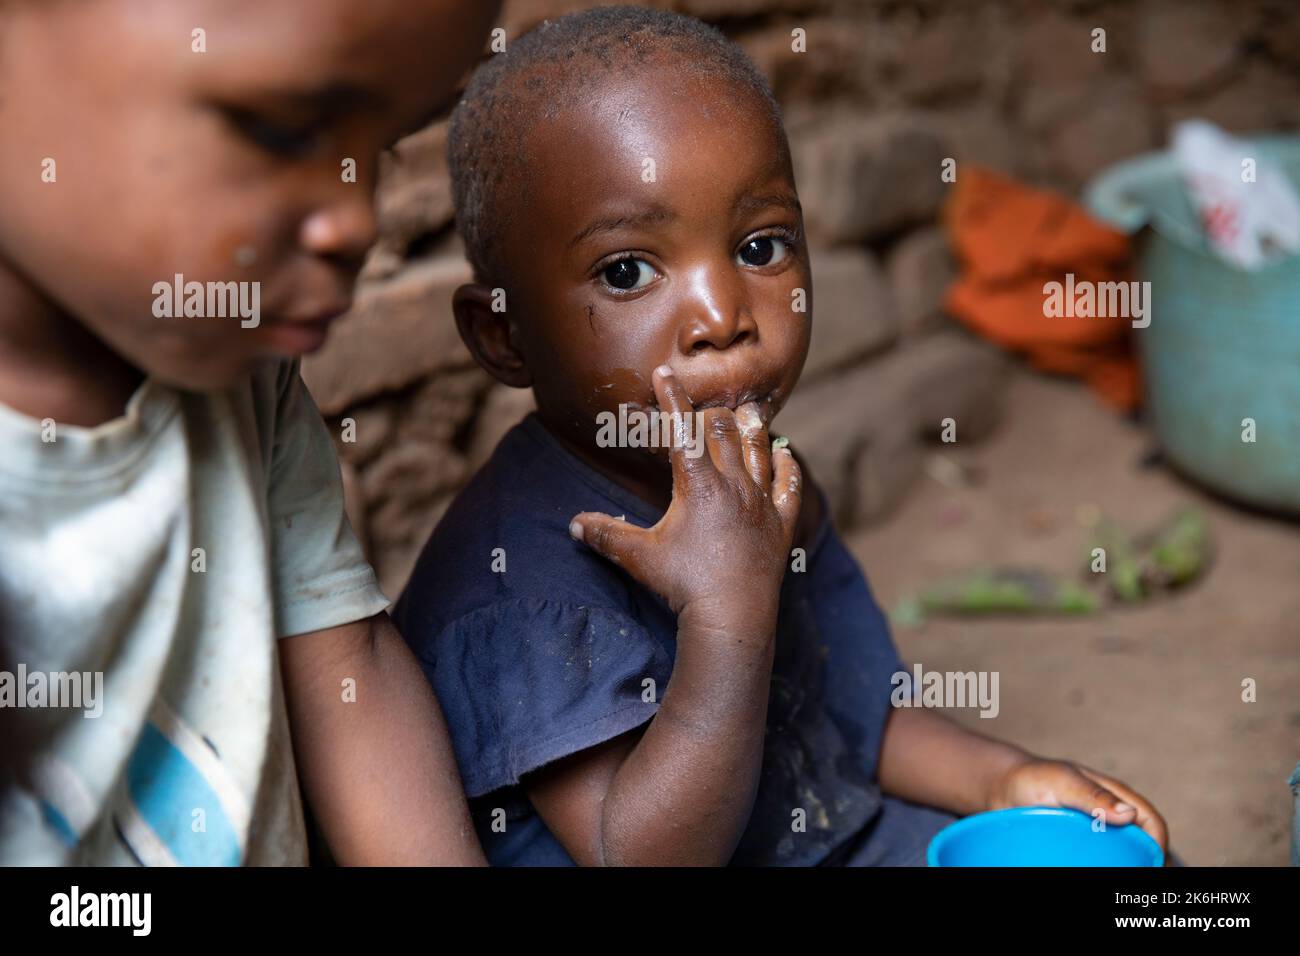 A group of African children eat a meal of starchy bananas and greens with peanut sauce inside their home in Kasese District, Uganda, East Africa. Stock Photo